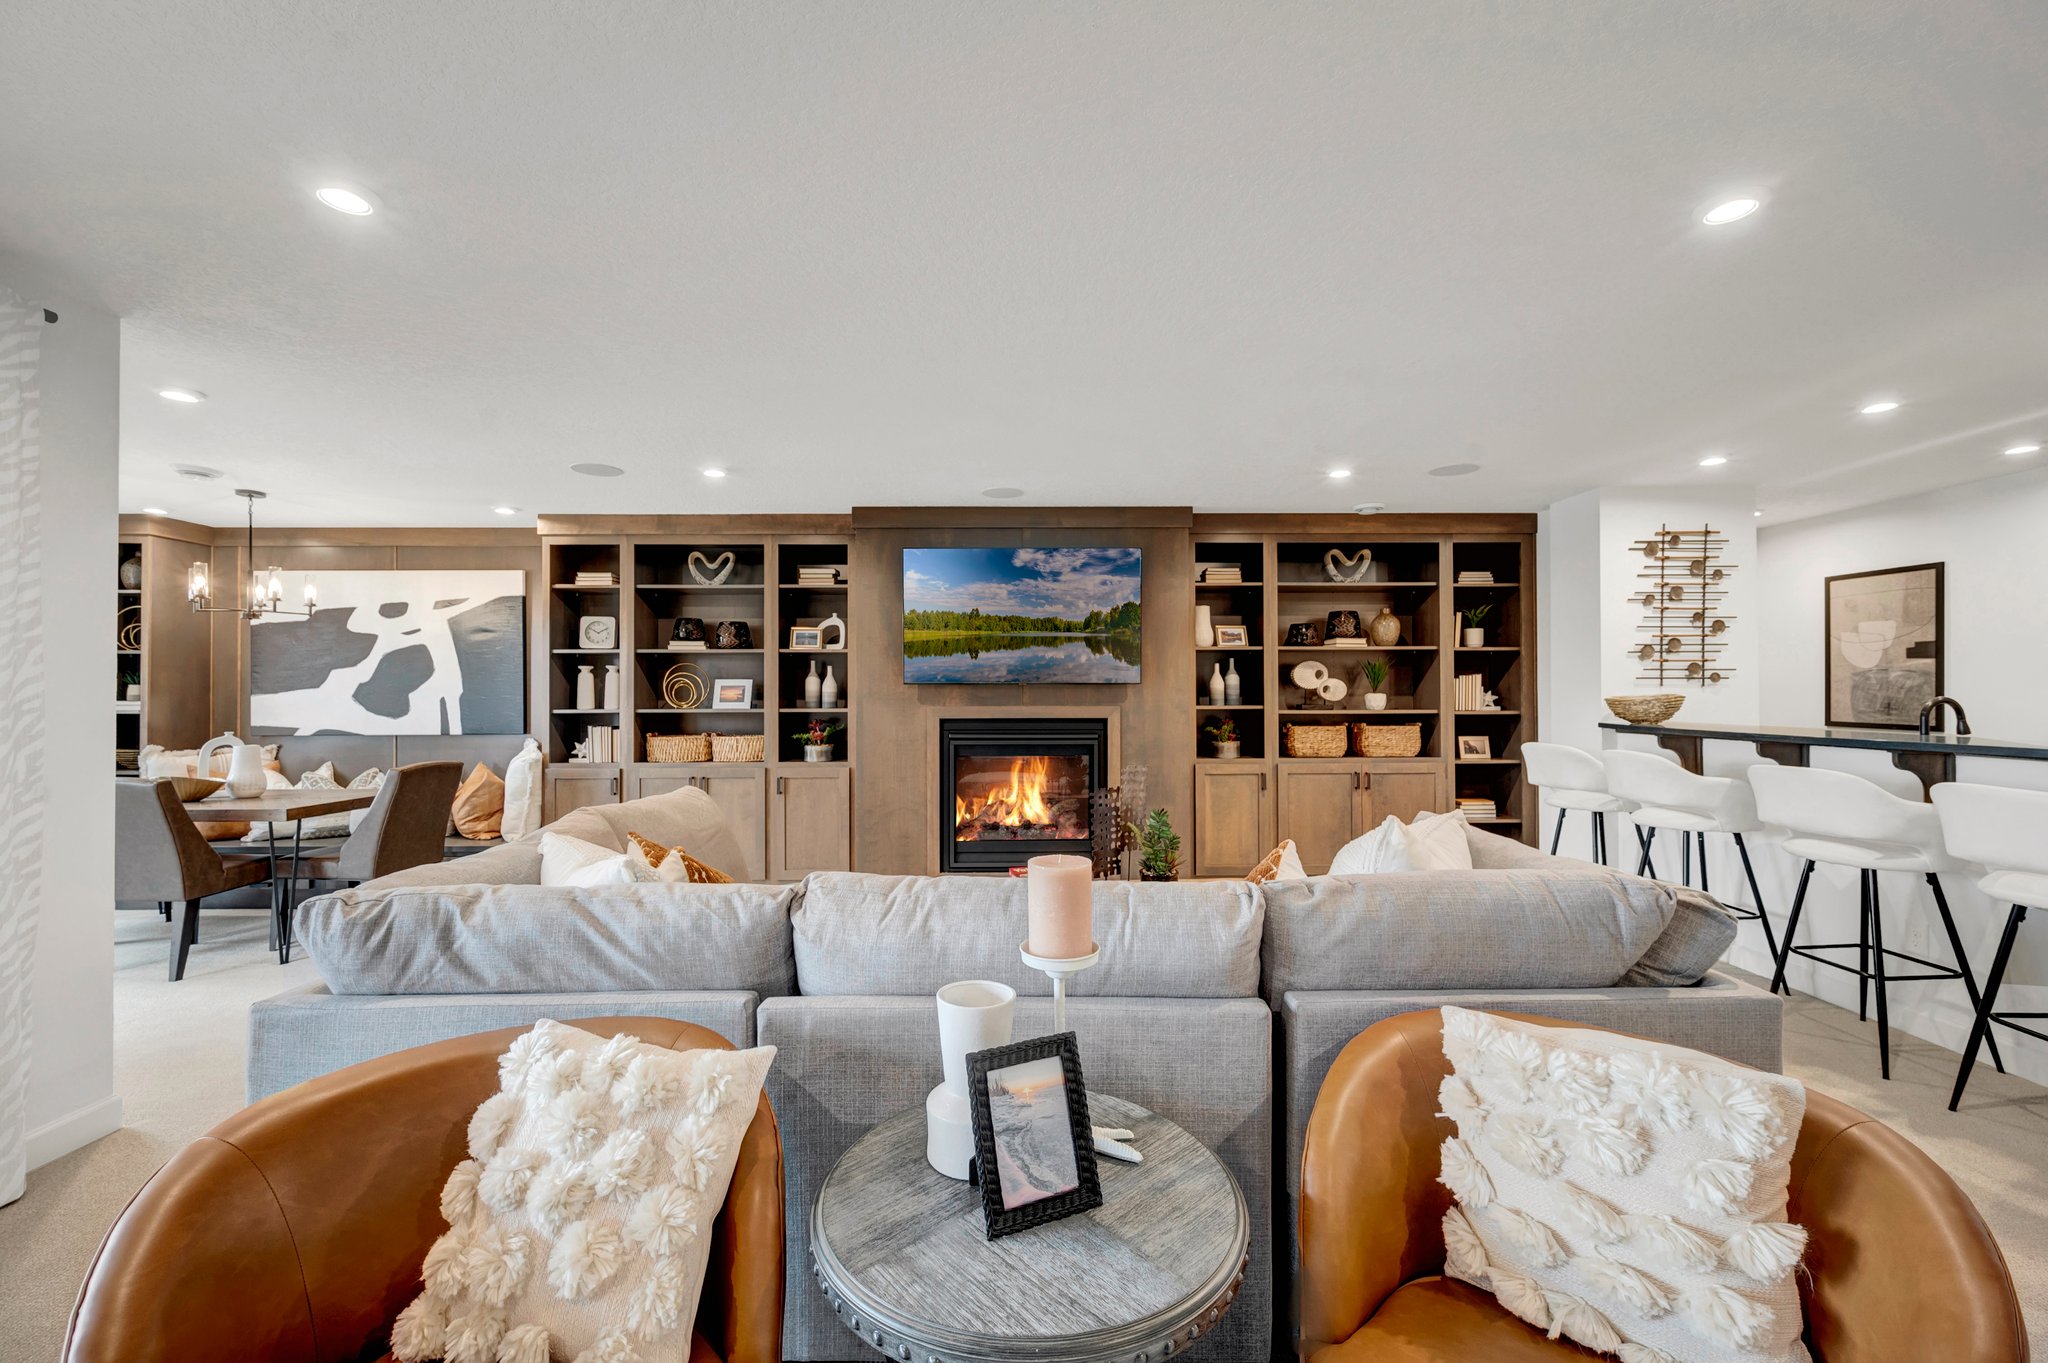 Large Basement With Several Seating Areas and a Fireplace in an Entertainment Center